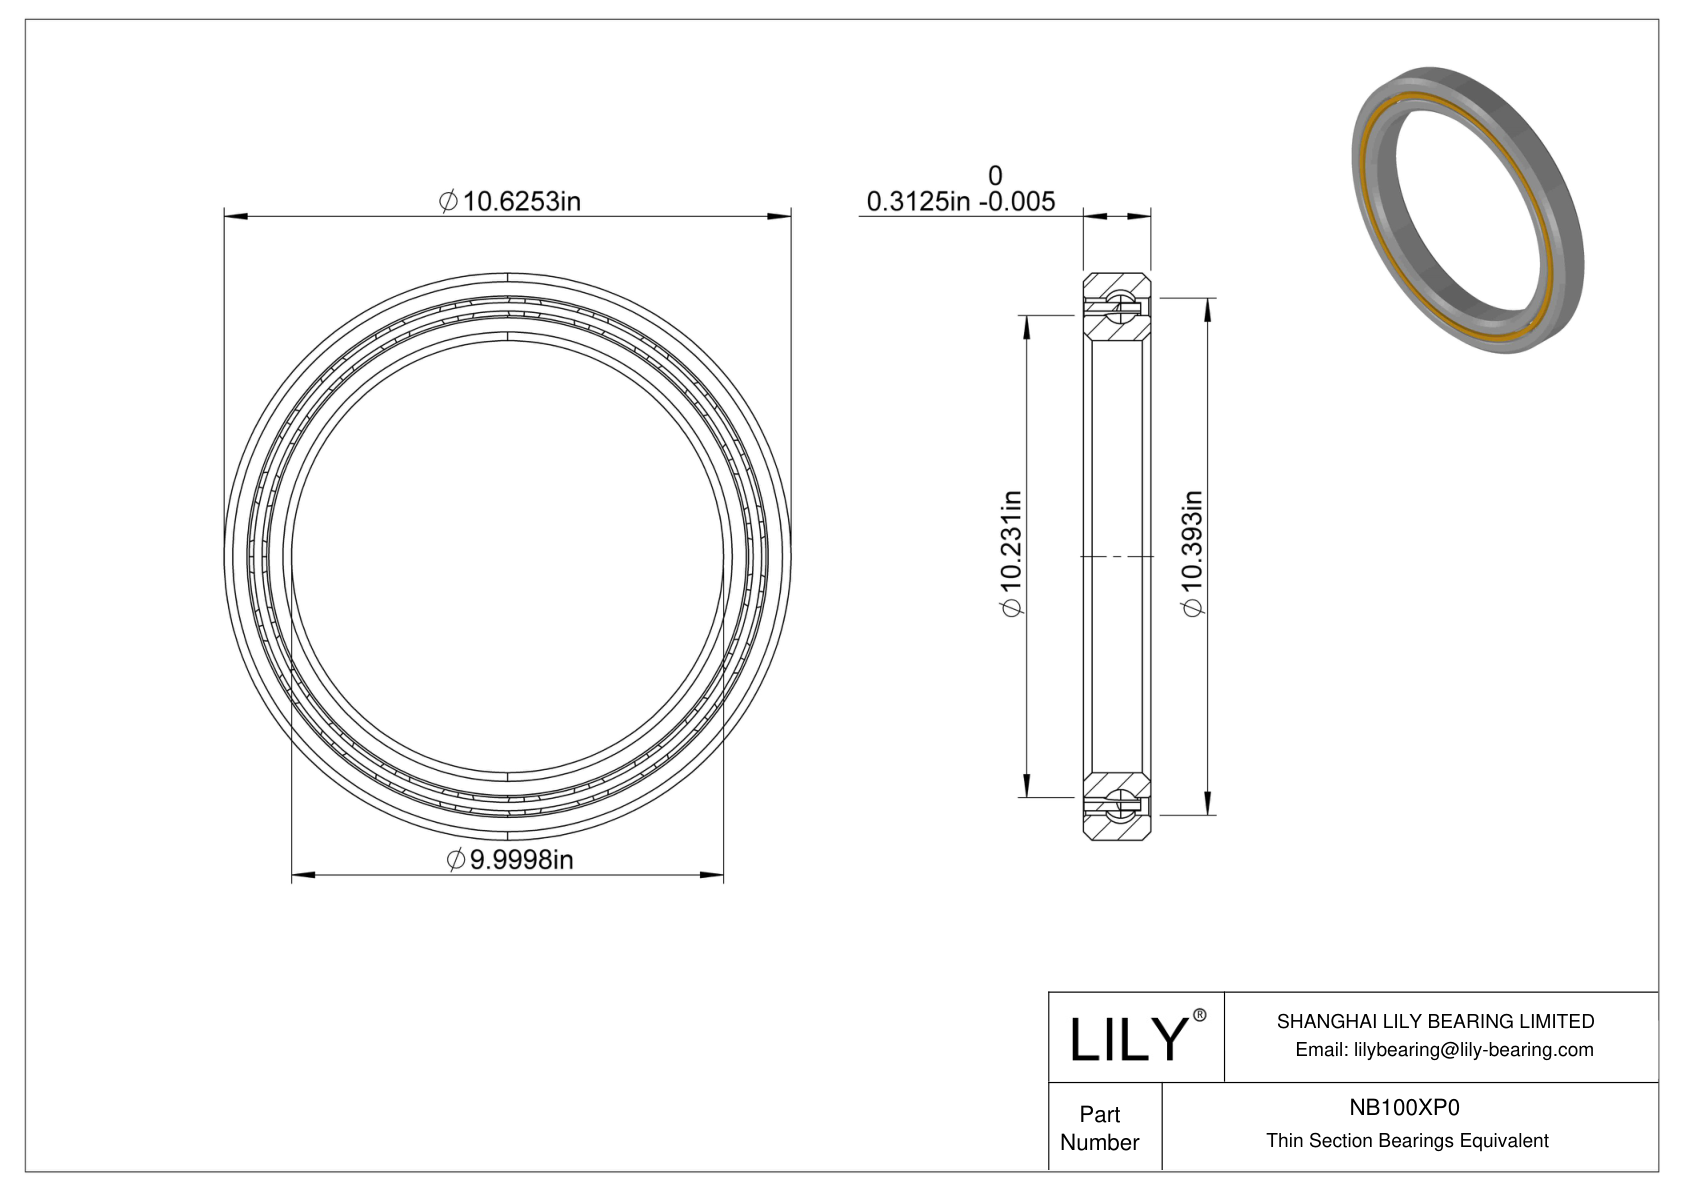 NB100XP0 Constant Section (CS) Bearings cad drawing